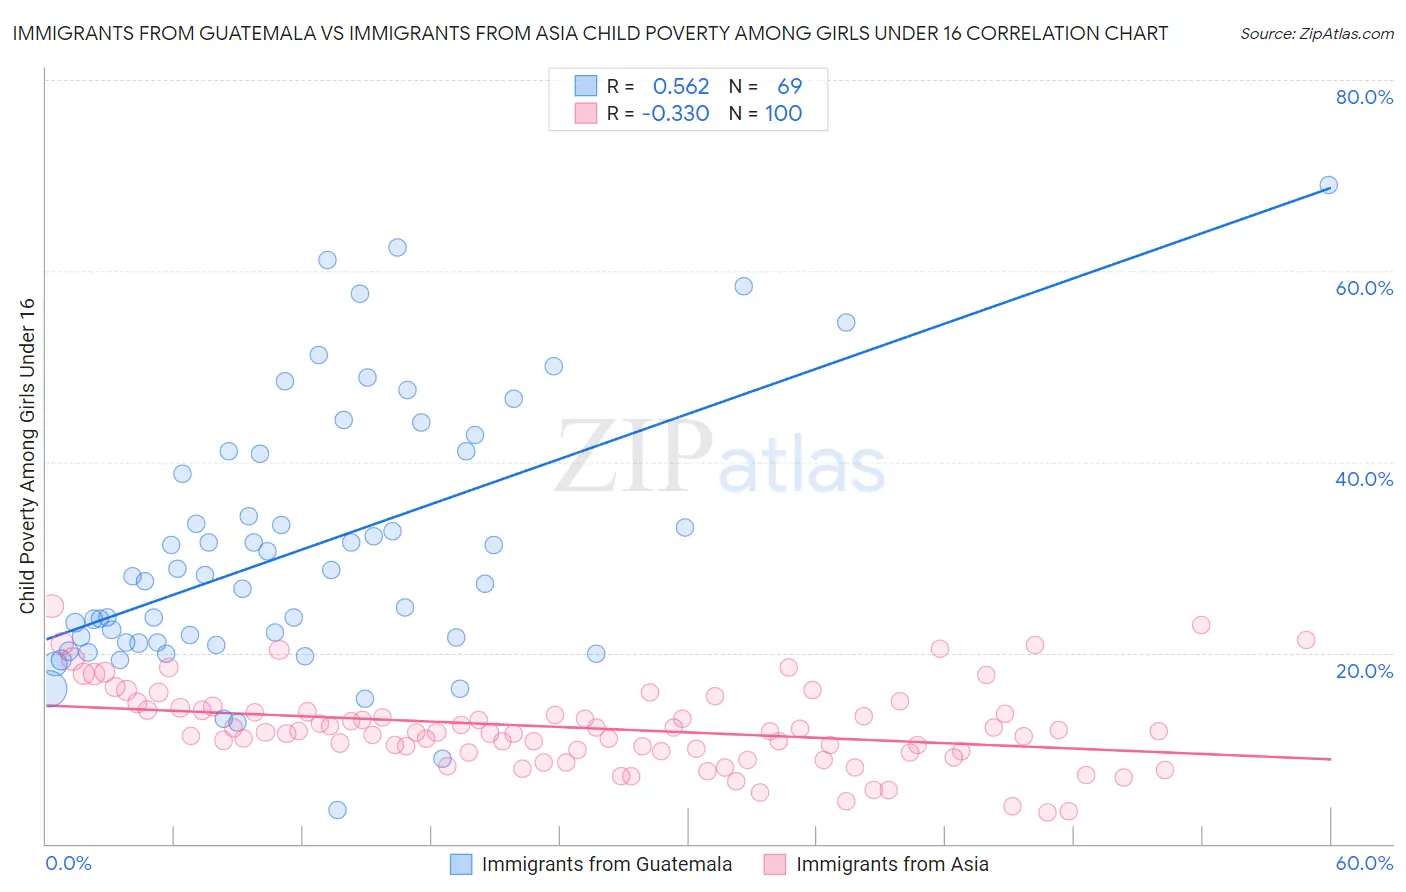 Immigrants from Guatemala vs Immigrants from Asia Child Poverty Among Girls Under 16